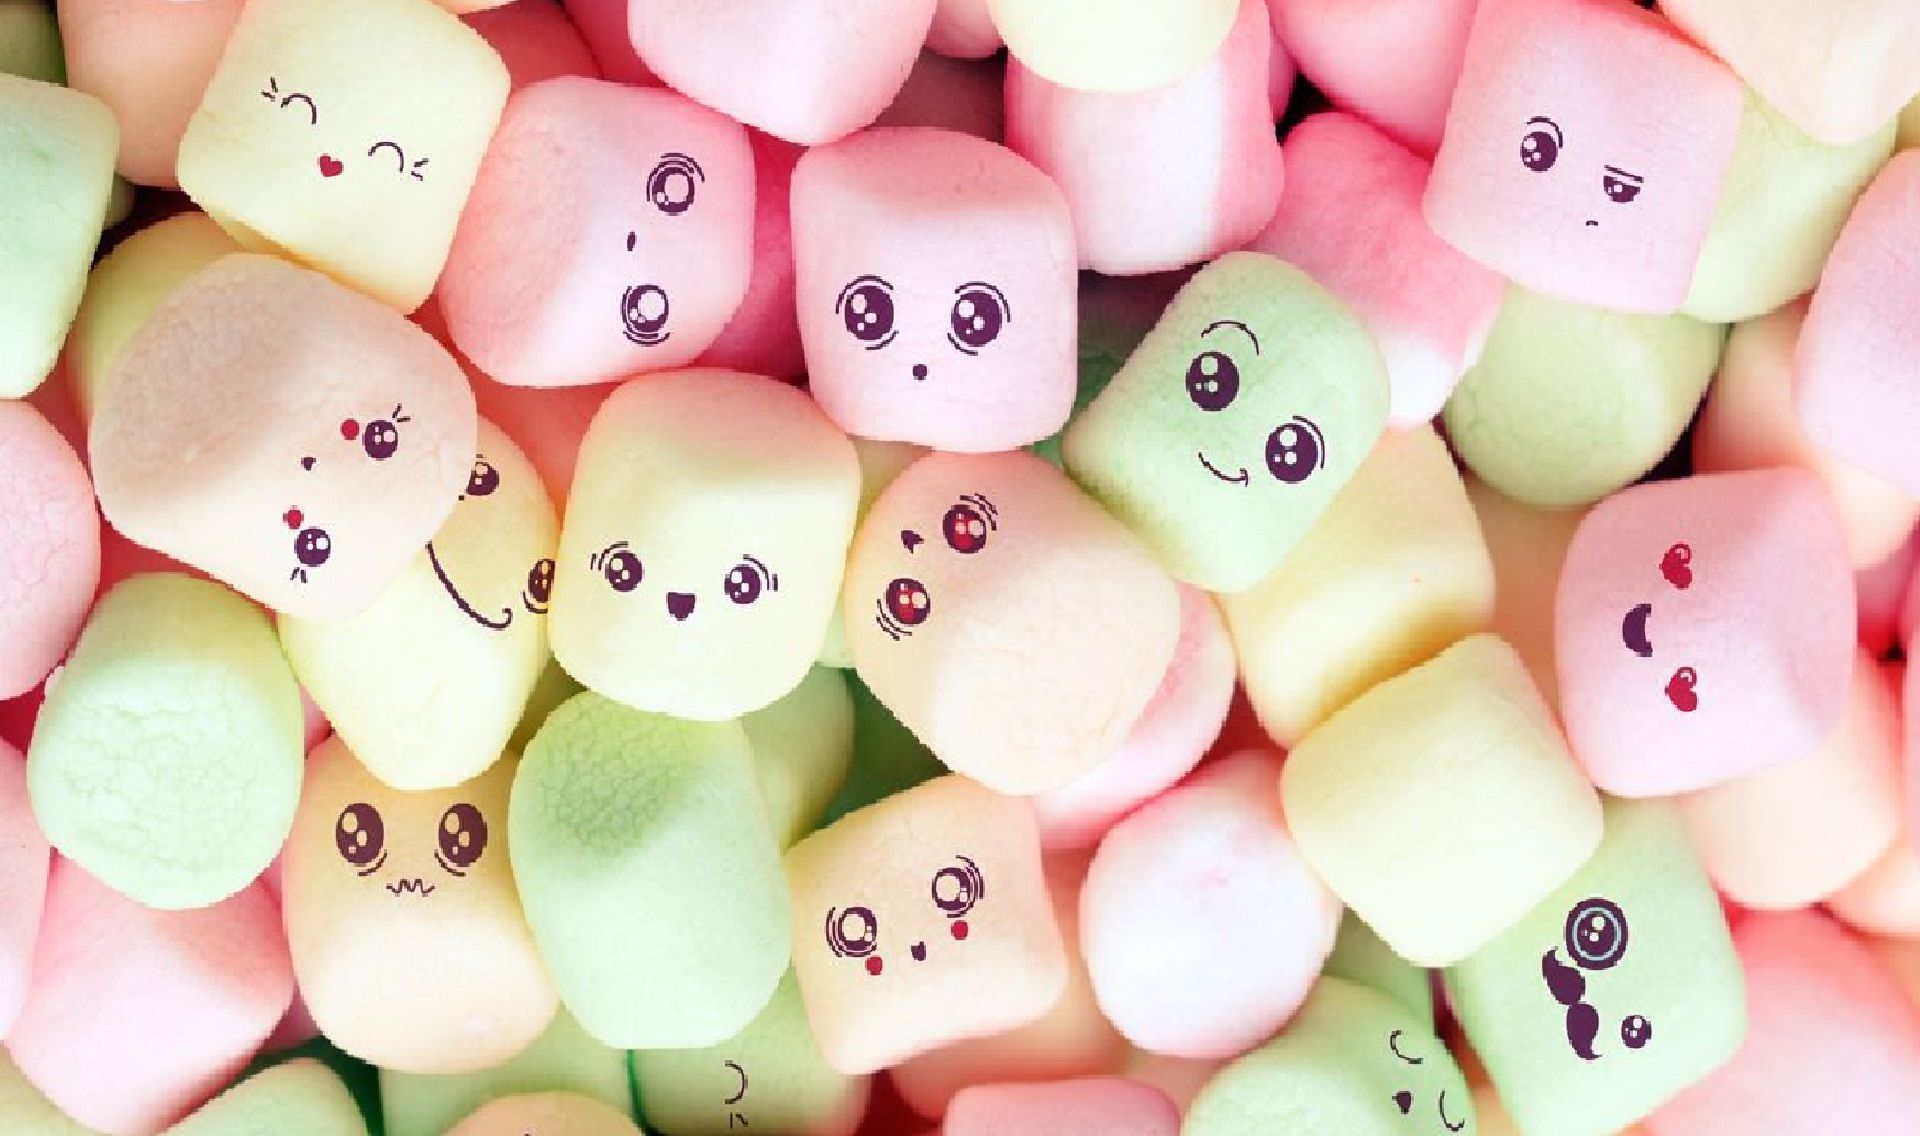 A pile of marshmallows with cute faces drawn on them. - Marshmallows